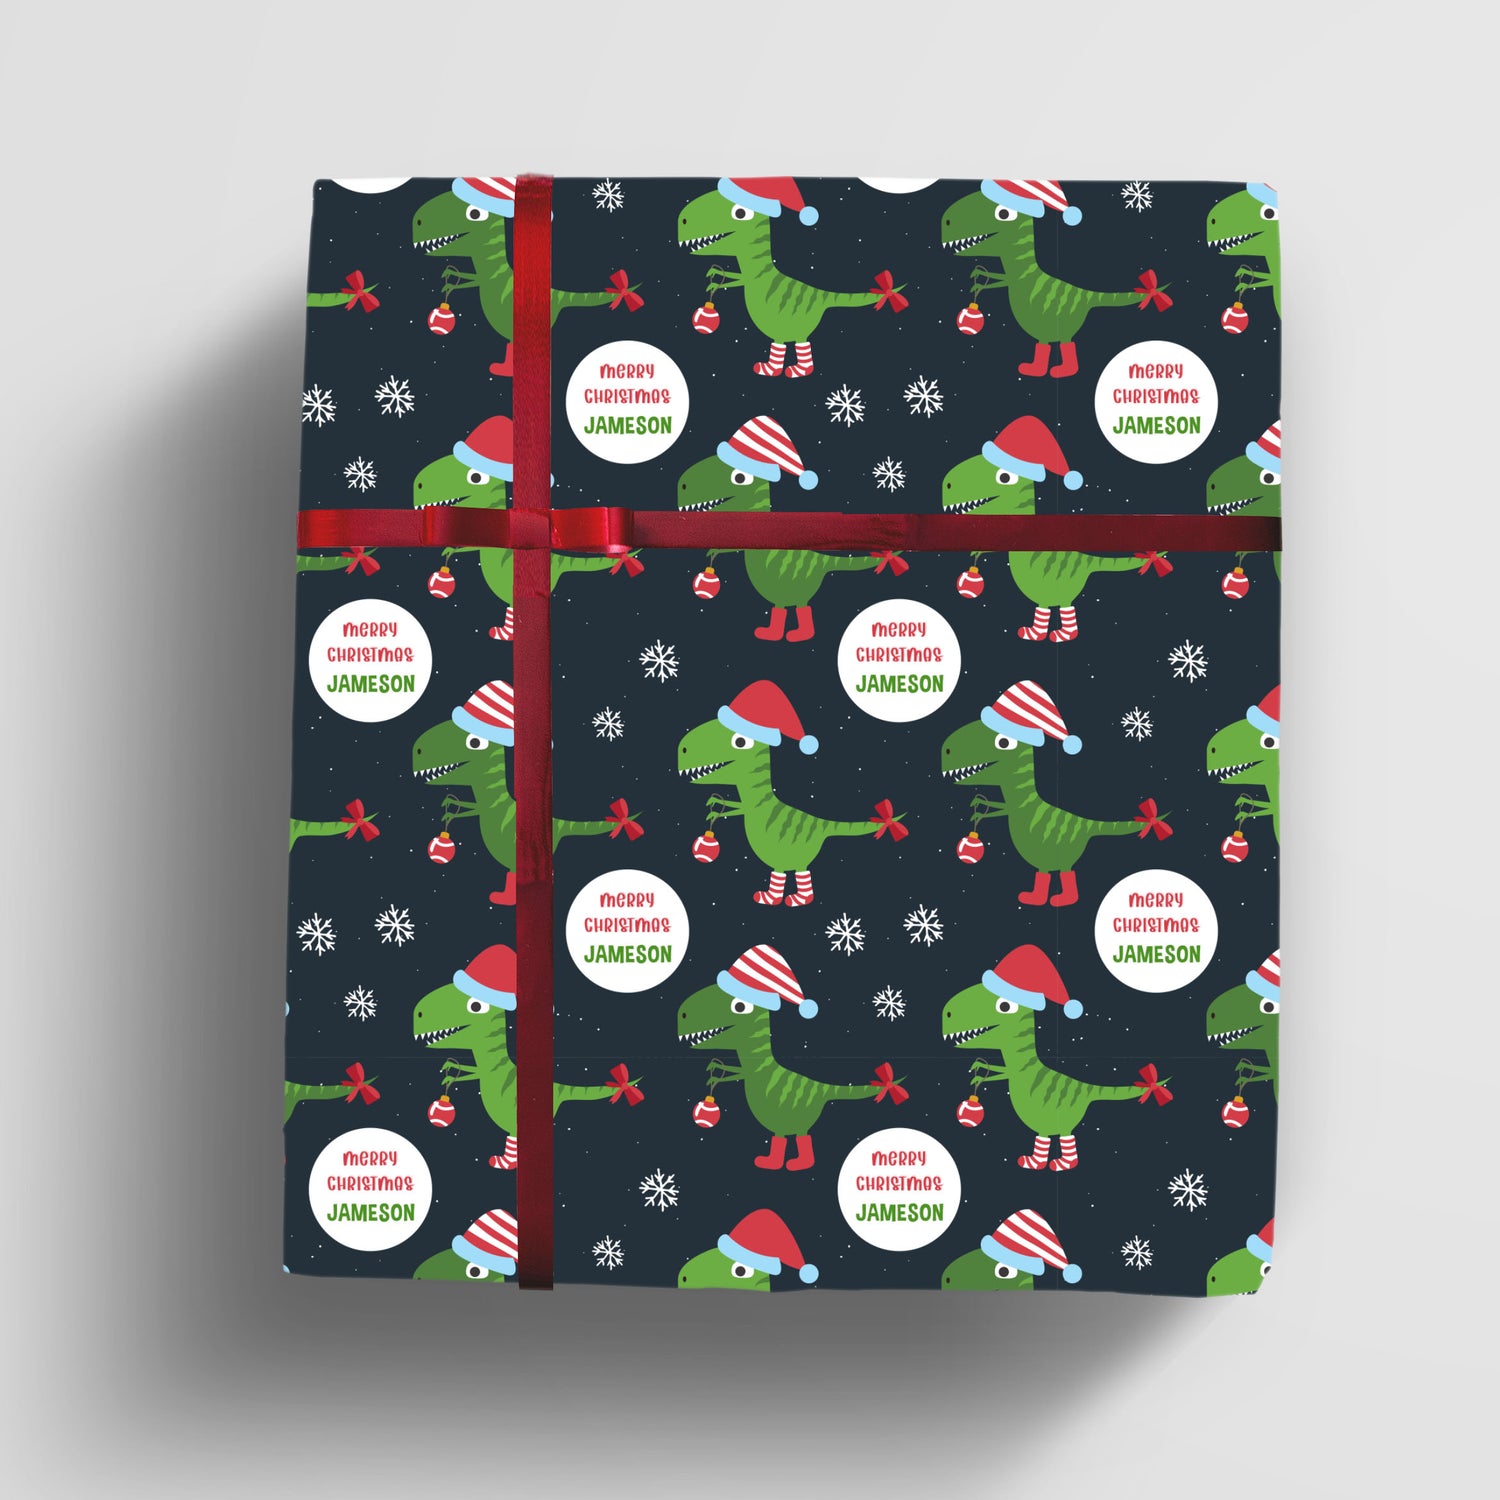 Custom Wrapping Paper - Personalized gift wrap for your loved one